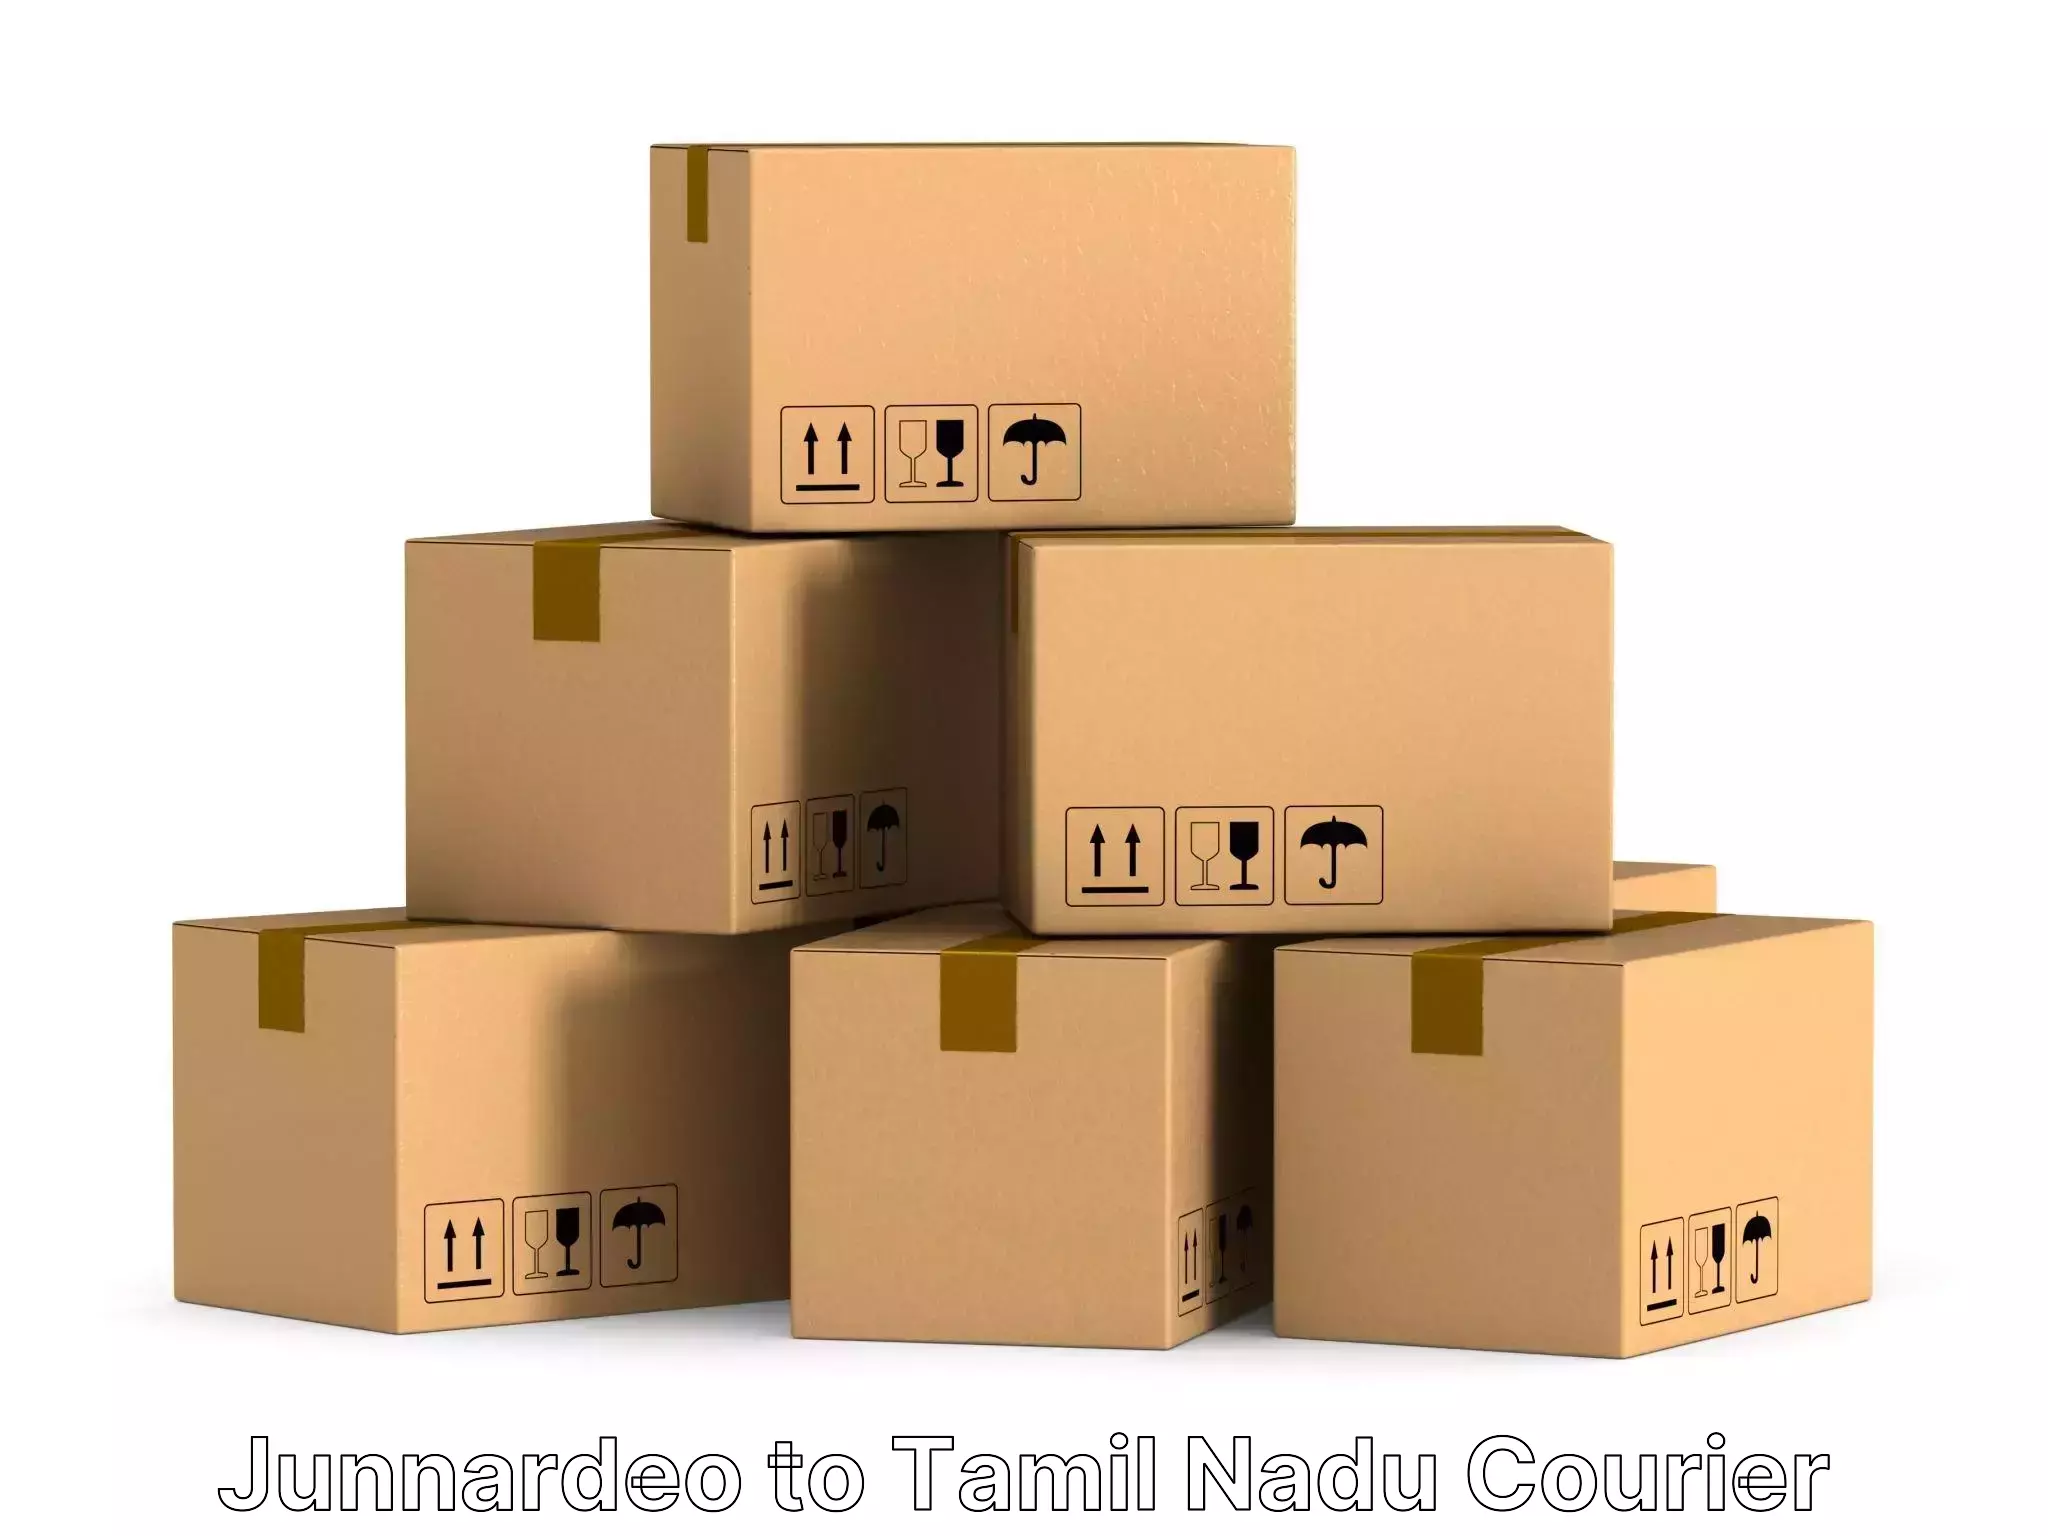 Quality moving services Junnardeo to Salem